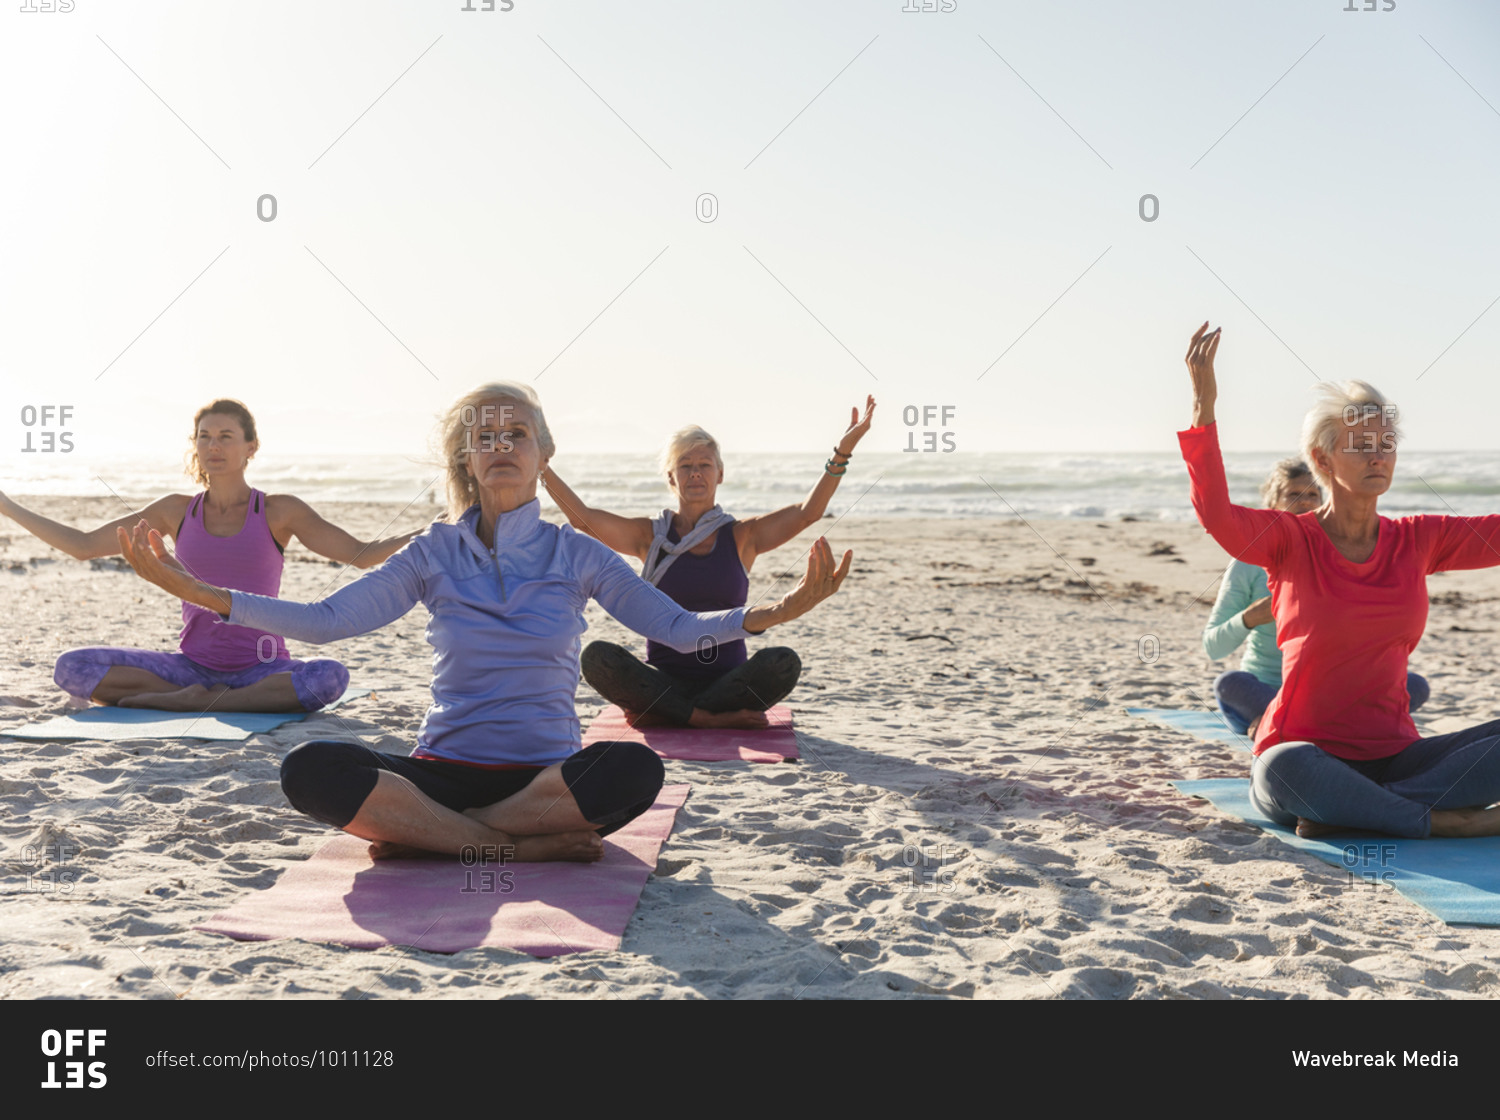 Group of Caucasian female friends enjoying exercising on a beach on a sunny day, practicing yoga, meditating in lotus position with sea in the background.